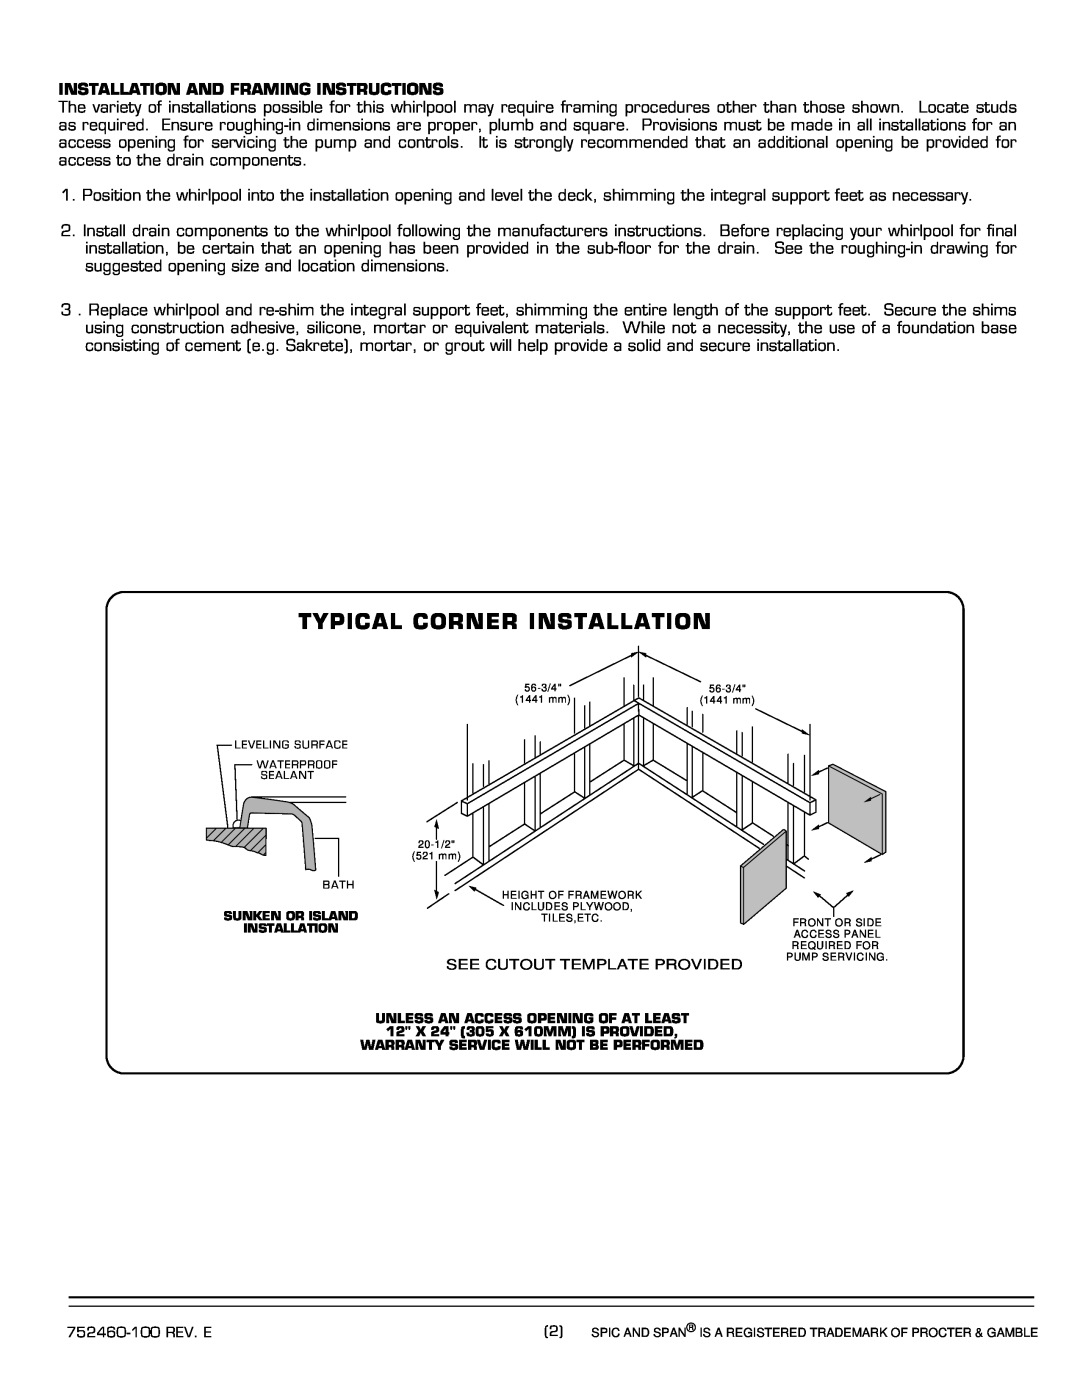 American Standard 2902.XXXW Series Typical Corner Installation, Installation And Framing Instructions 